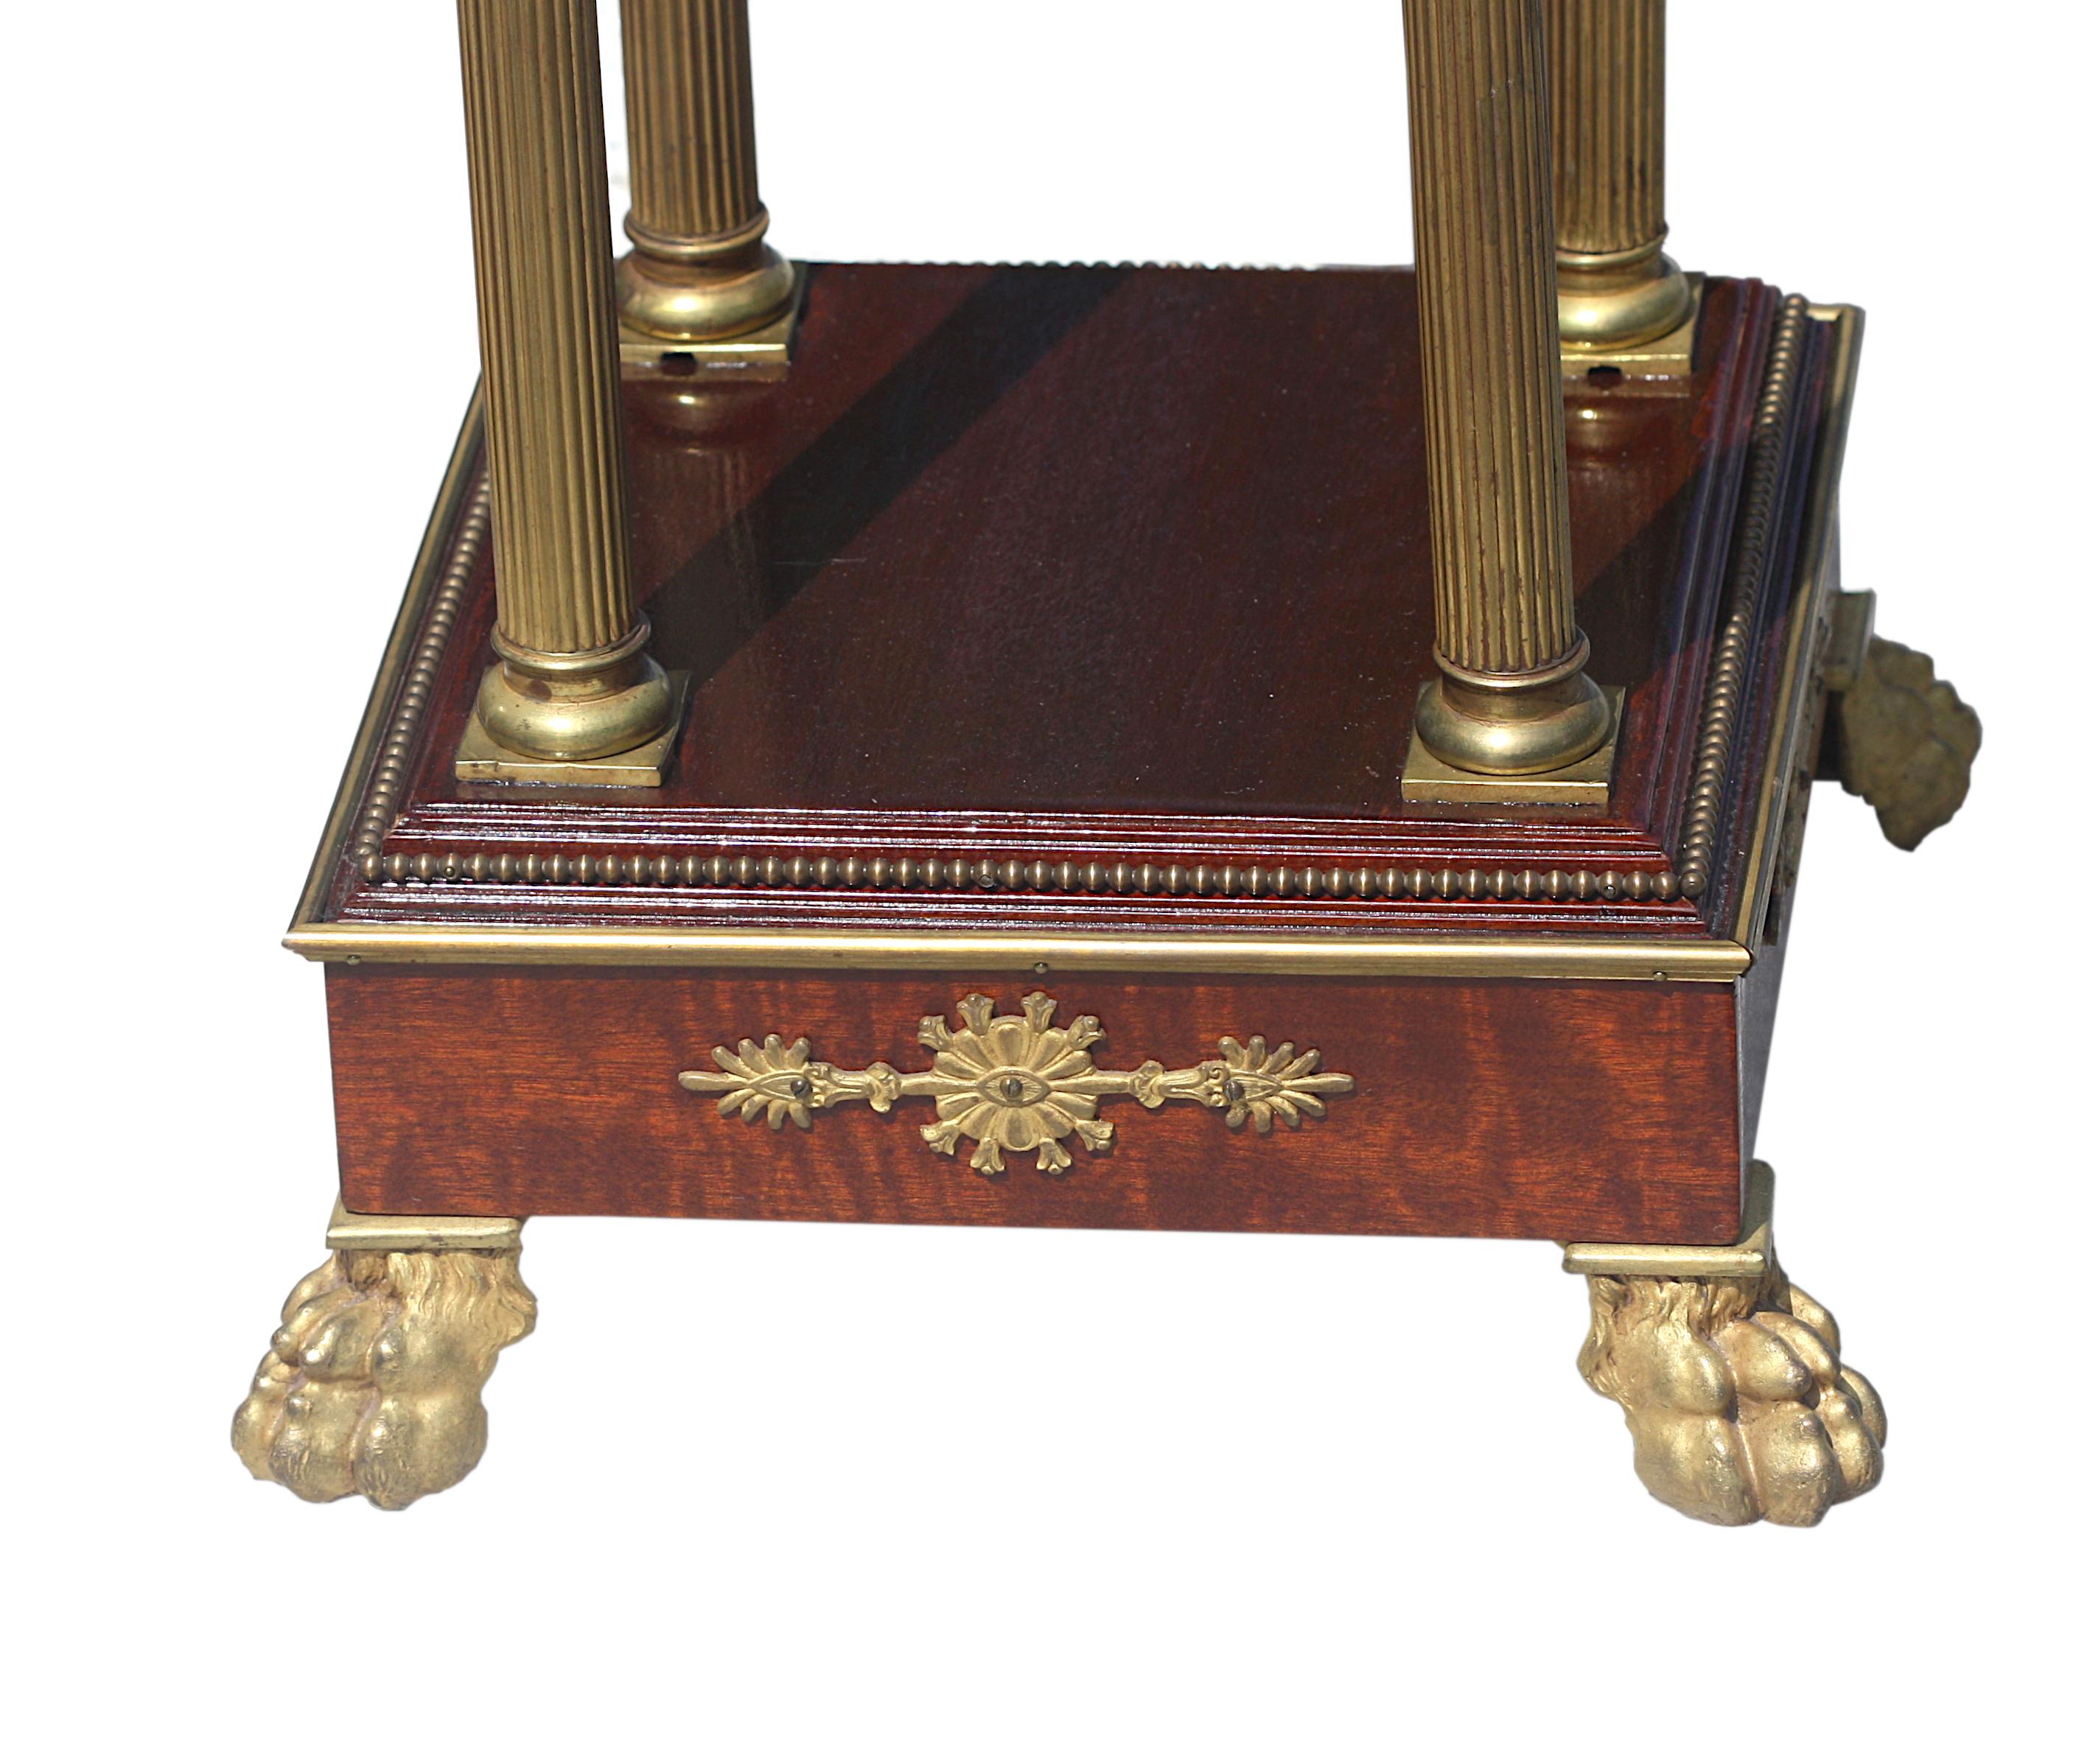 20th Century Continental Onyx and Gilt-Bronze Pedestal For Sale